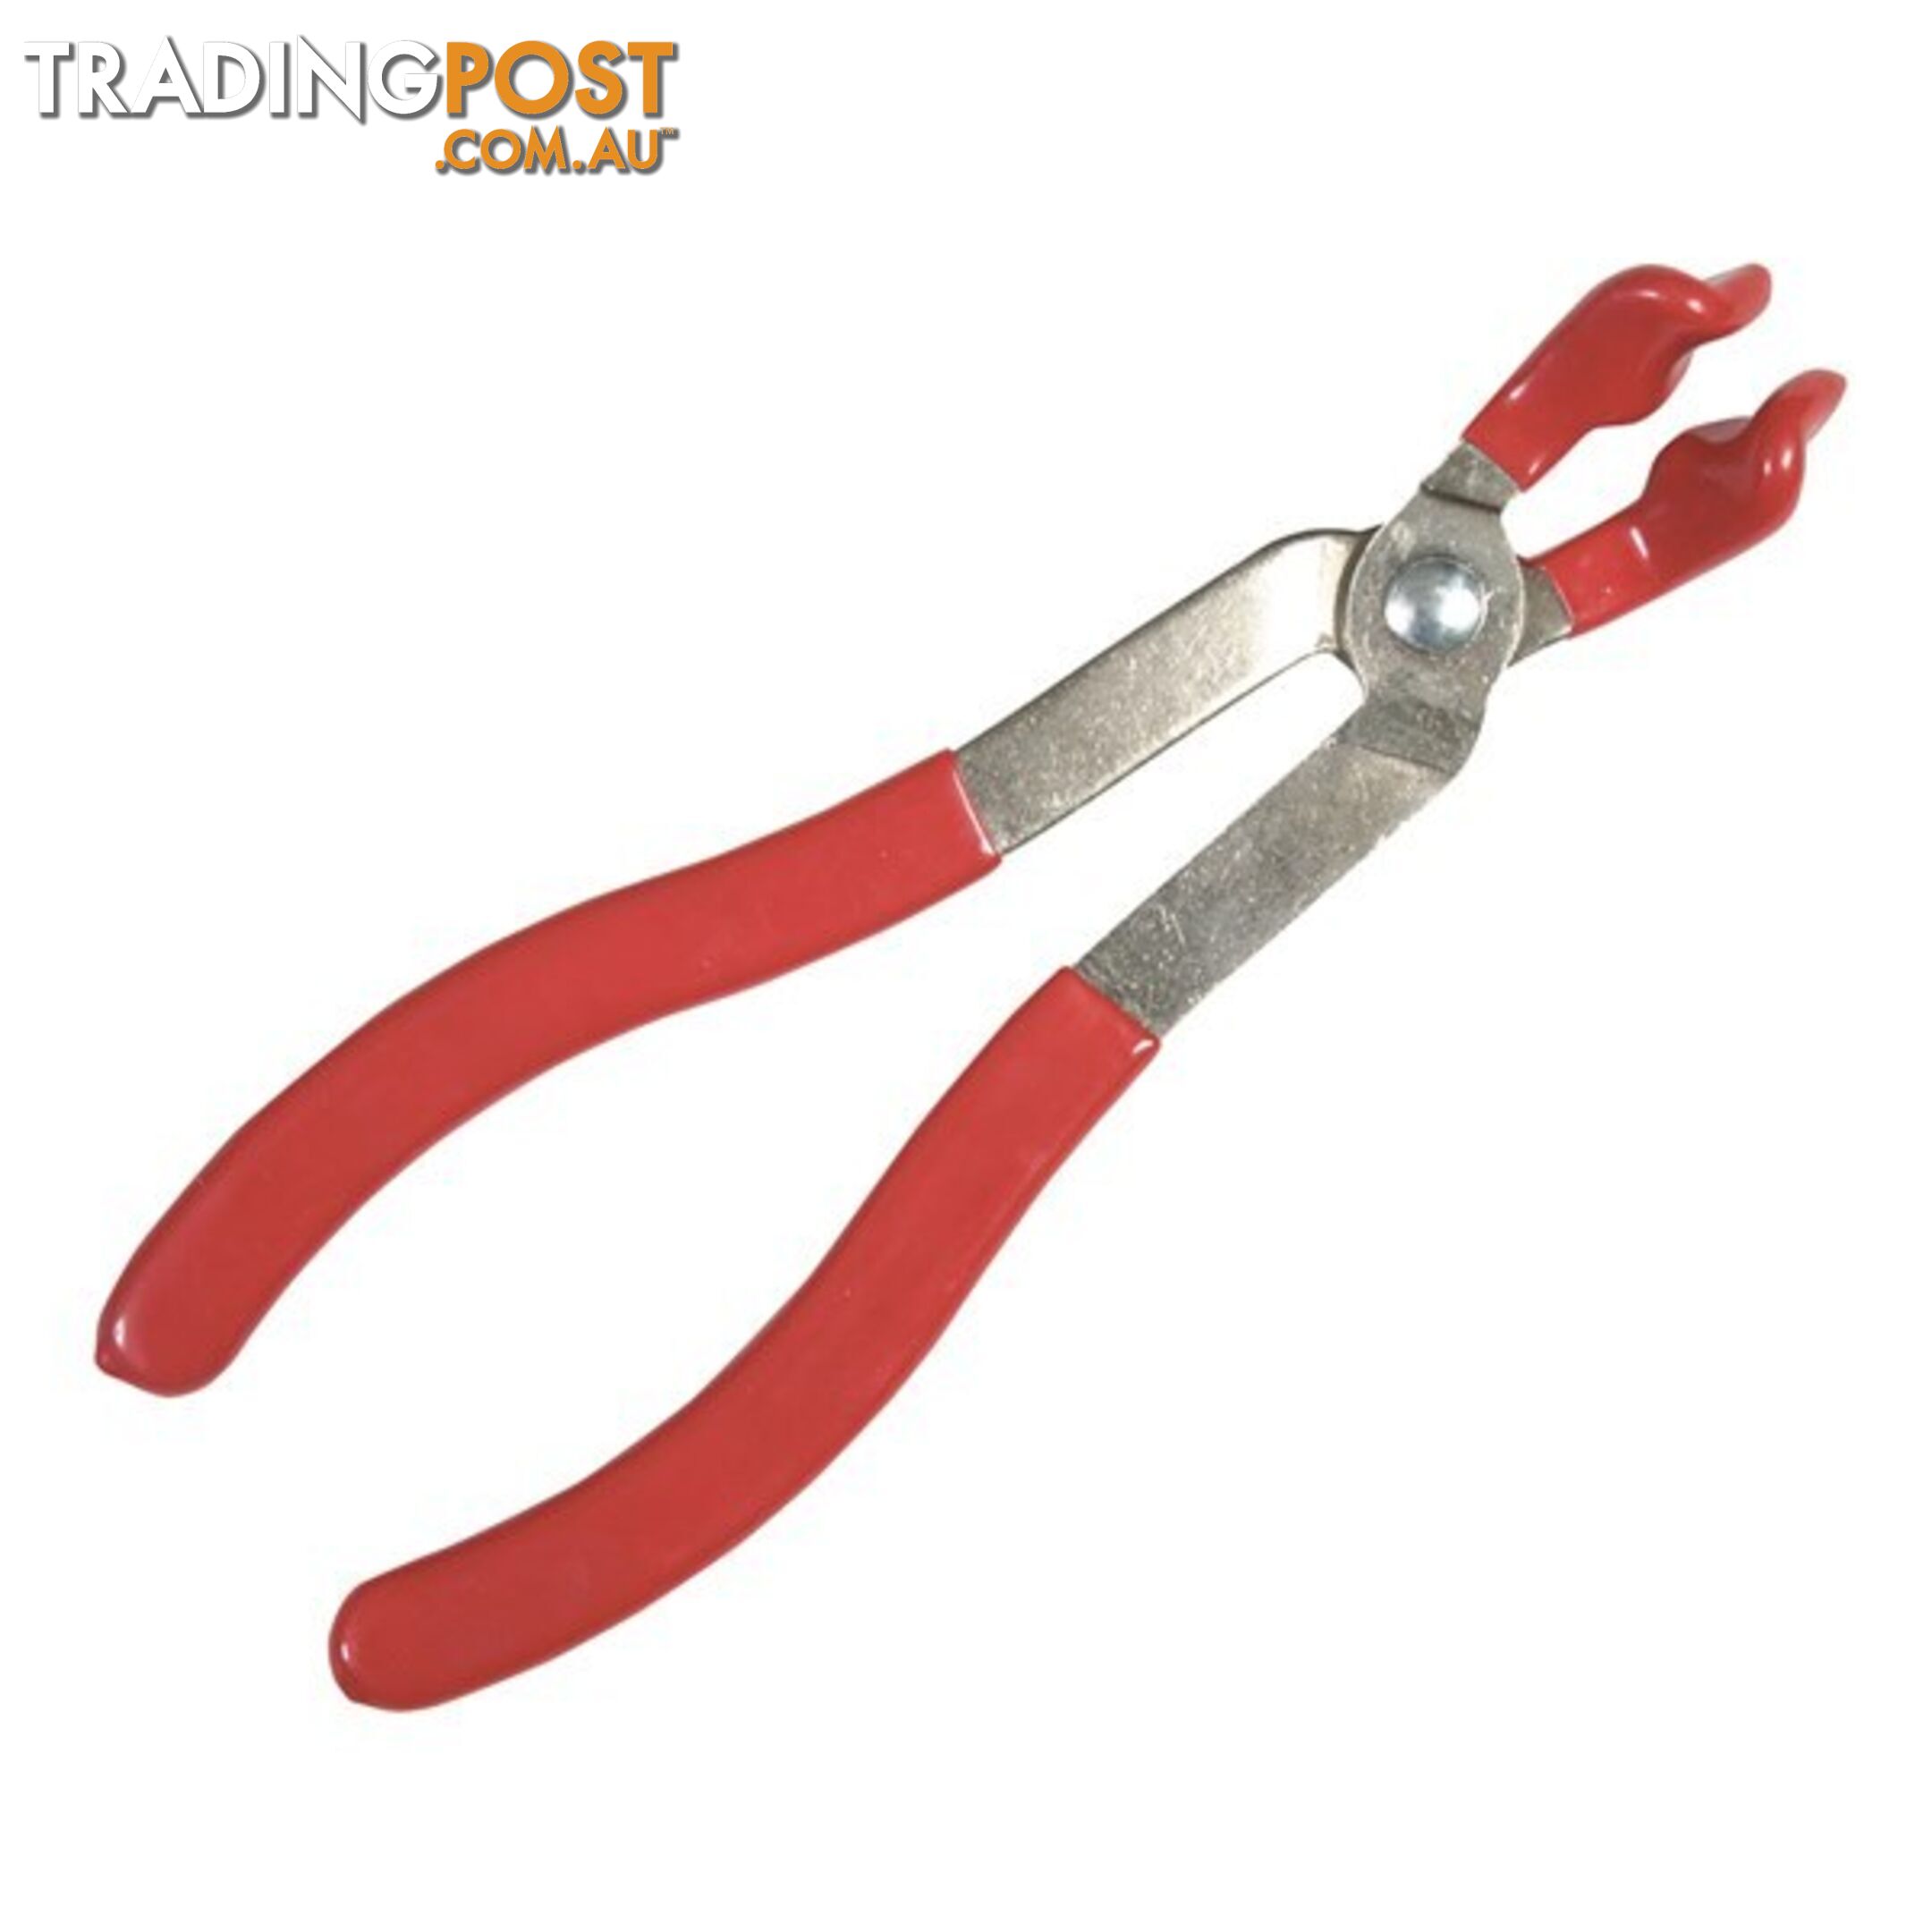 Knipex 160mm Combination Pliers SKU - 302160